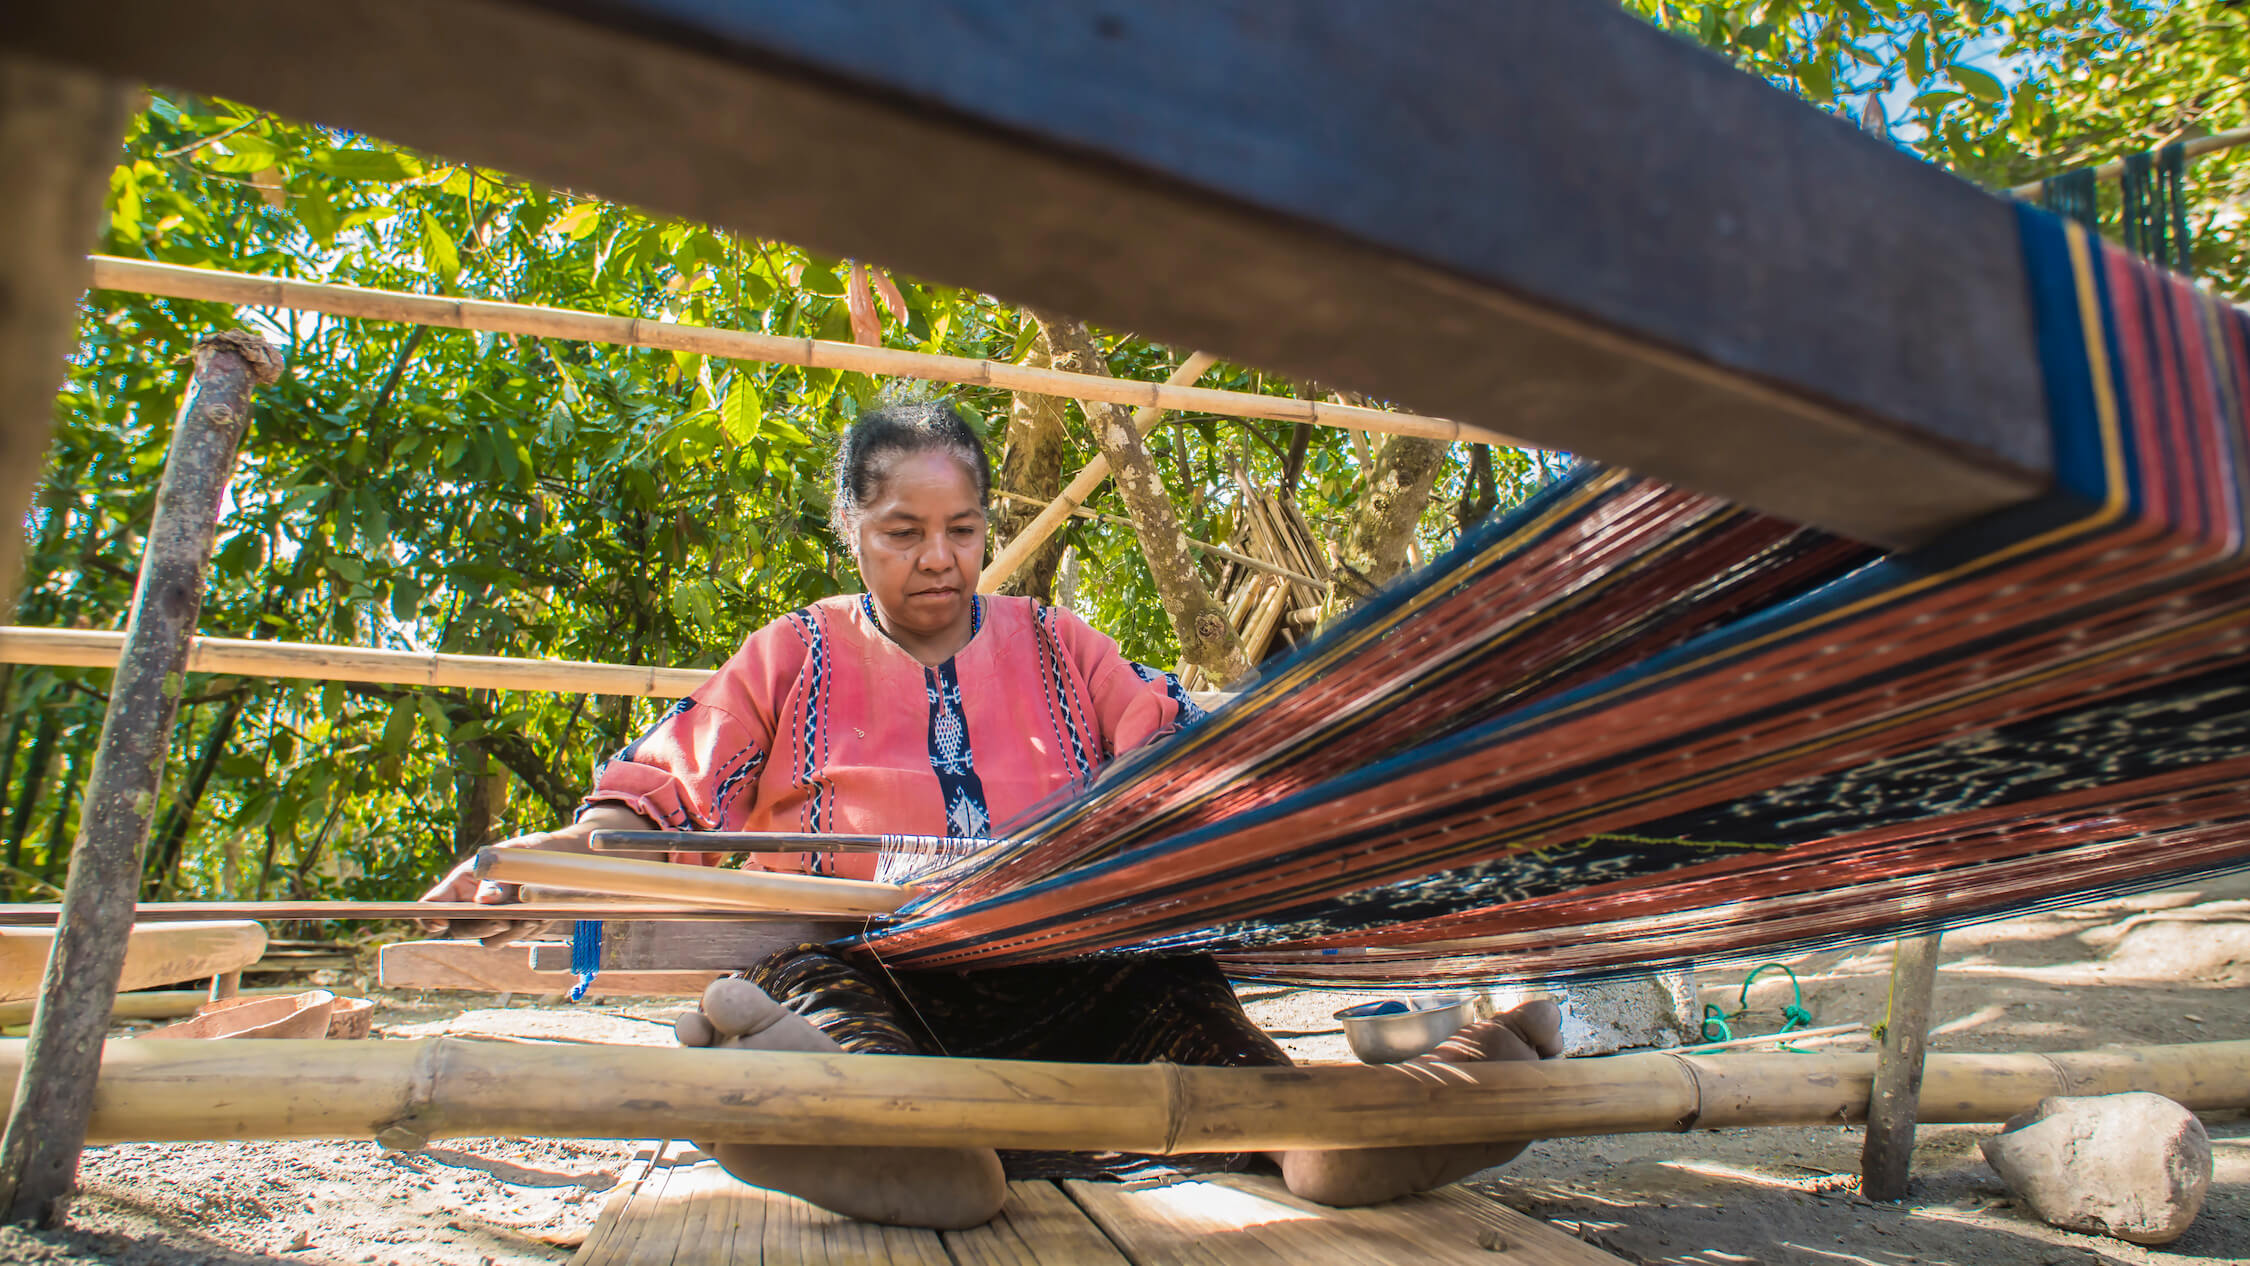 Virgensia demonstrates weaving on a loom. Just like meditation, weaving is a practice for presence and mindfulness. Photo by Andra Fembriarto